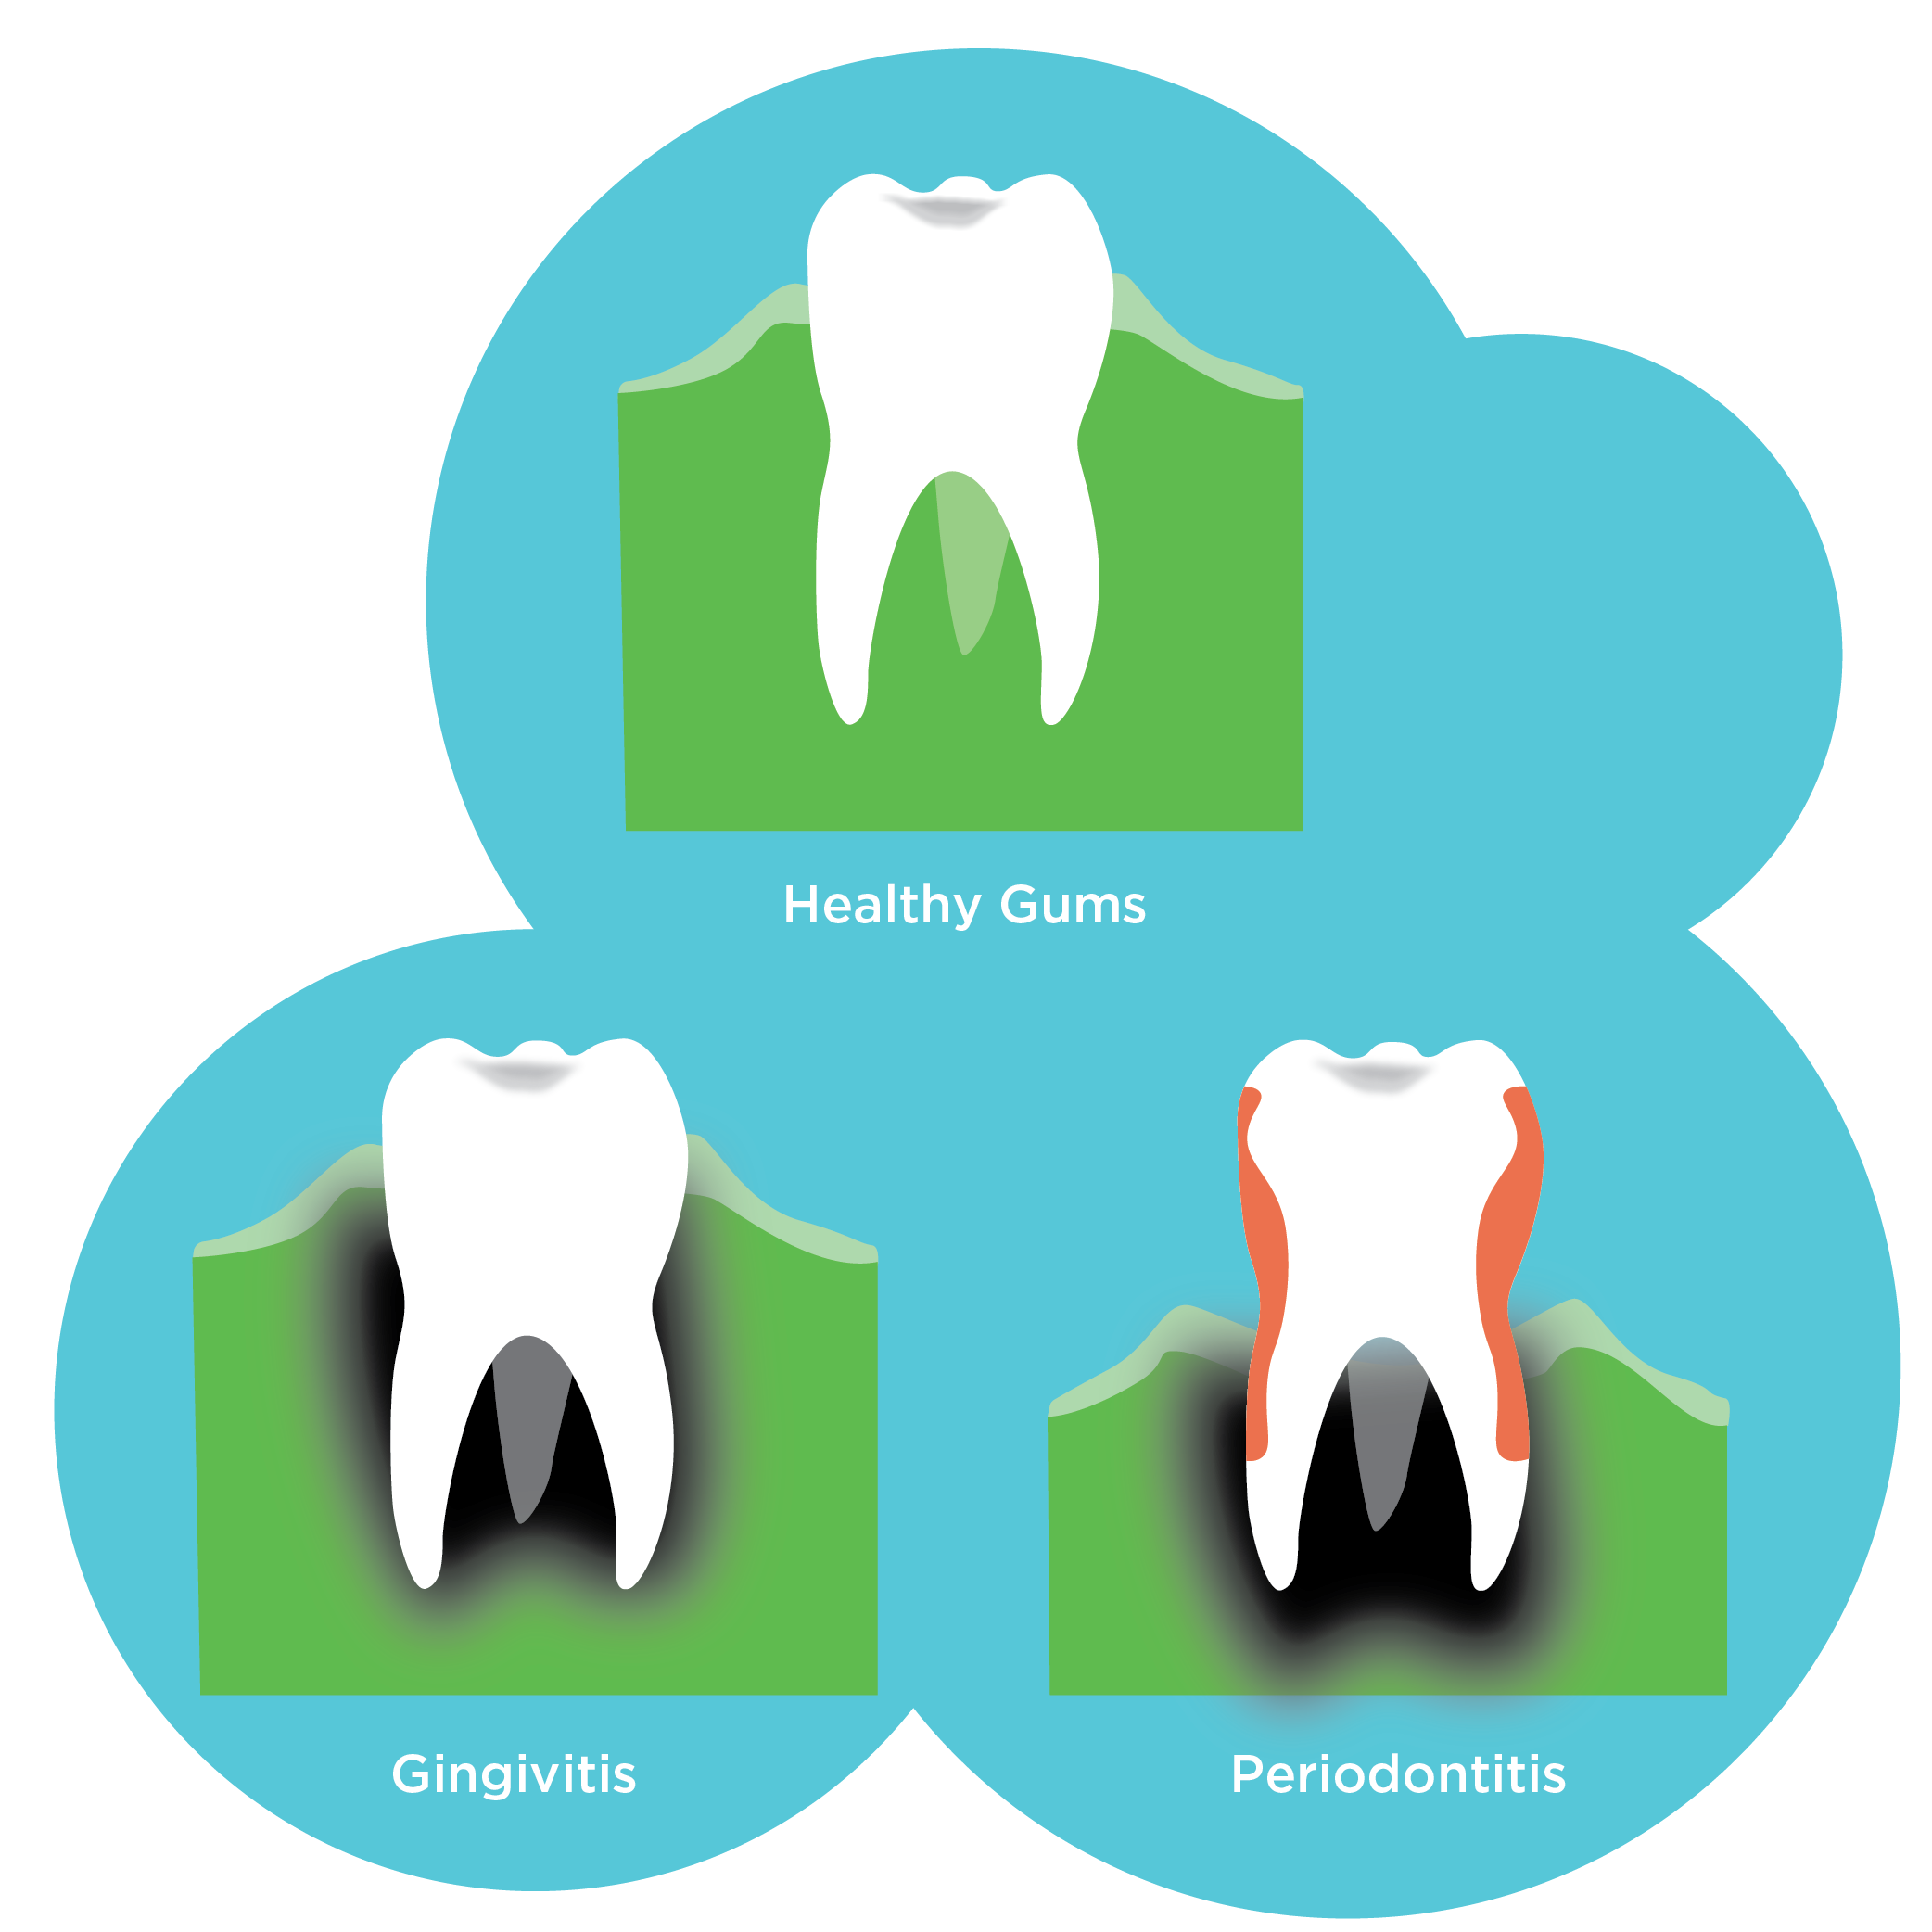 Illustrations of 3 teeth indicating healthy gums, gingivitis and periodontitis 